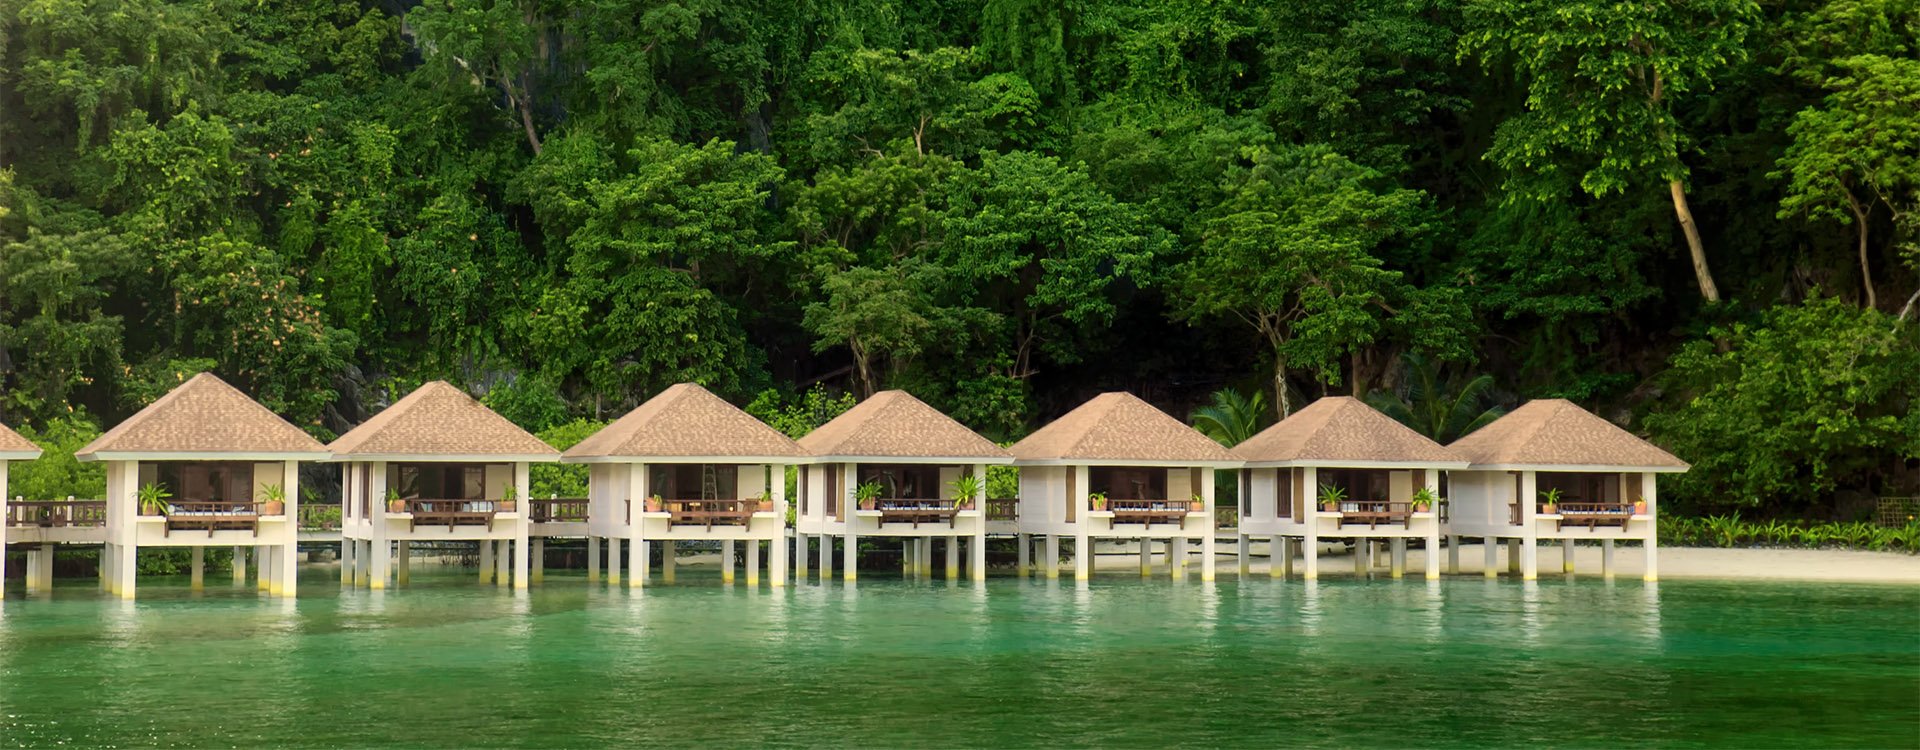 Cottages on stilts in El Nido, Palawan, Philippines, green rainforest background